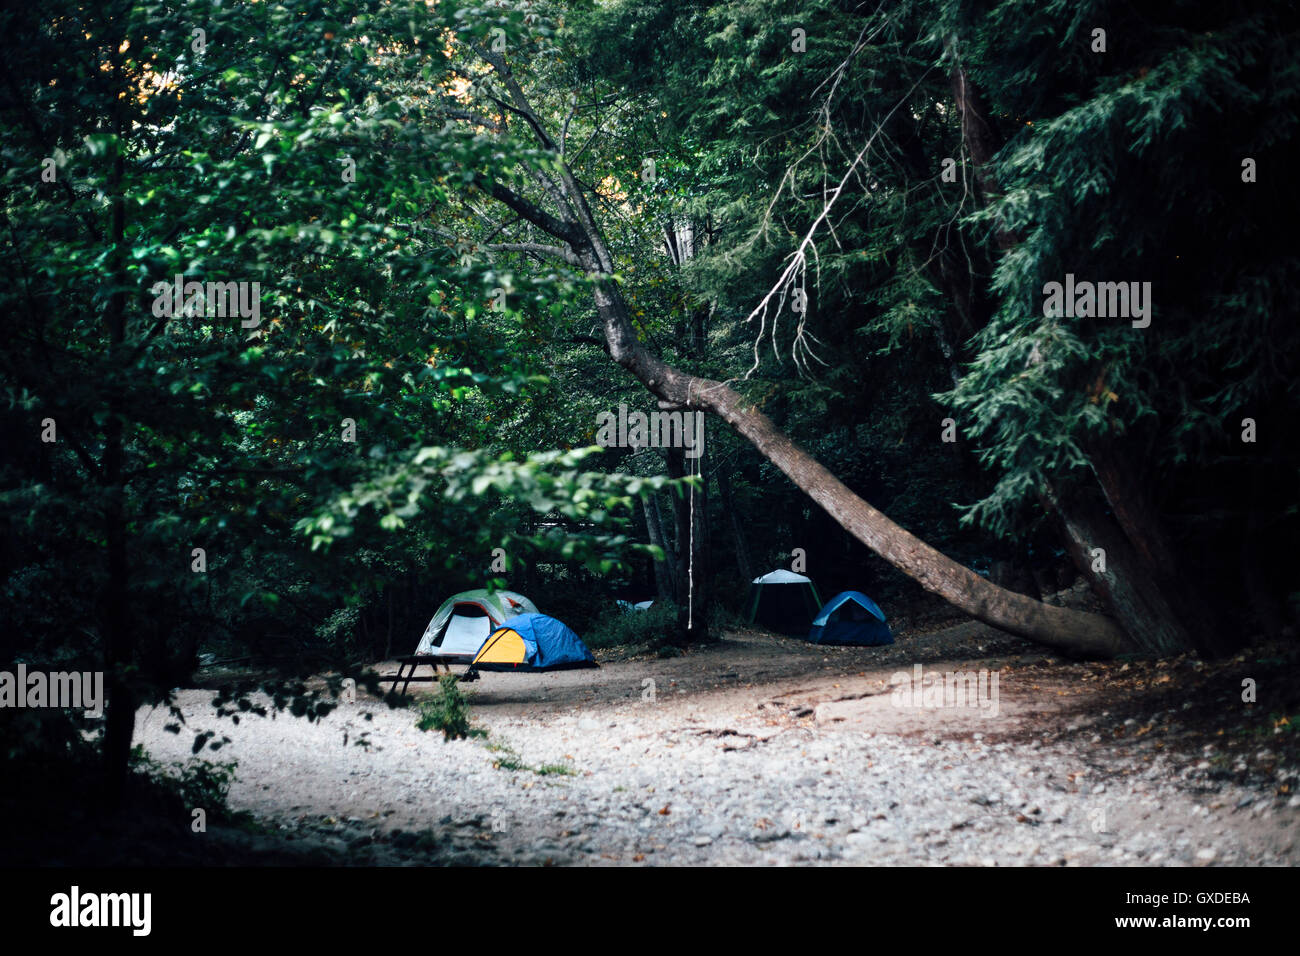 Small group of tents camping in dark forest, Big Sur, California, USA Stock Photo